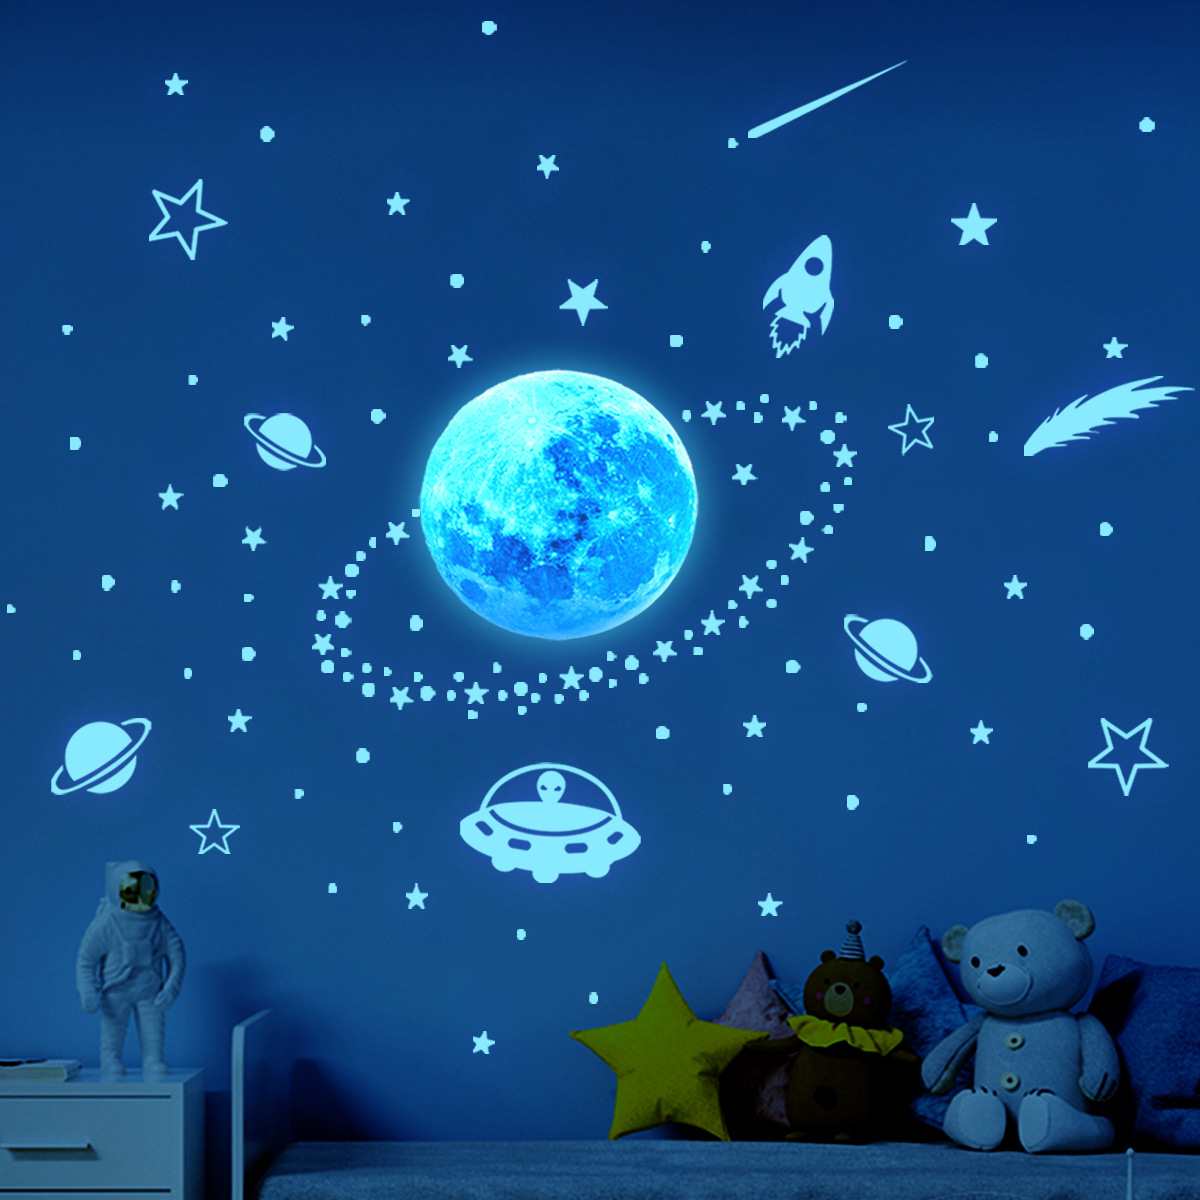 Glowing Dark Stars On Ceiling, Glowing Stars Of Ceiling Planets, Star Wall  Sticker